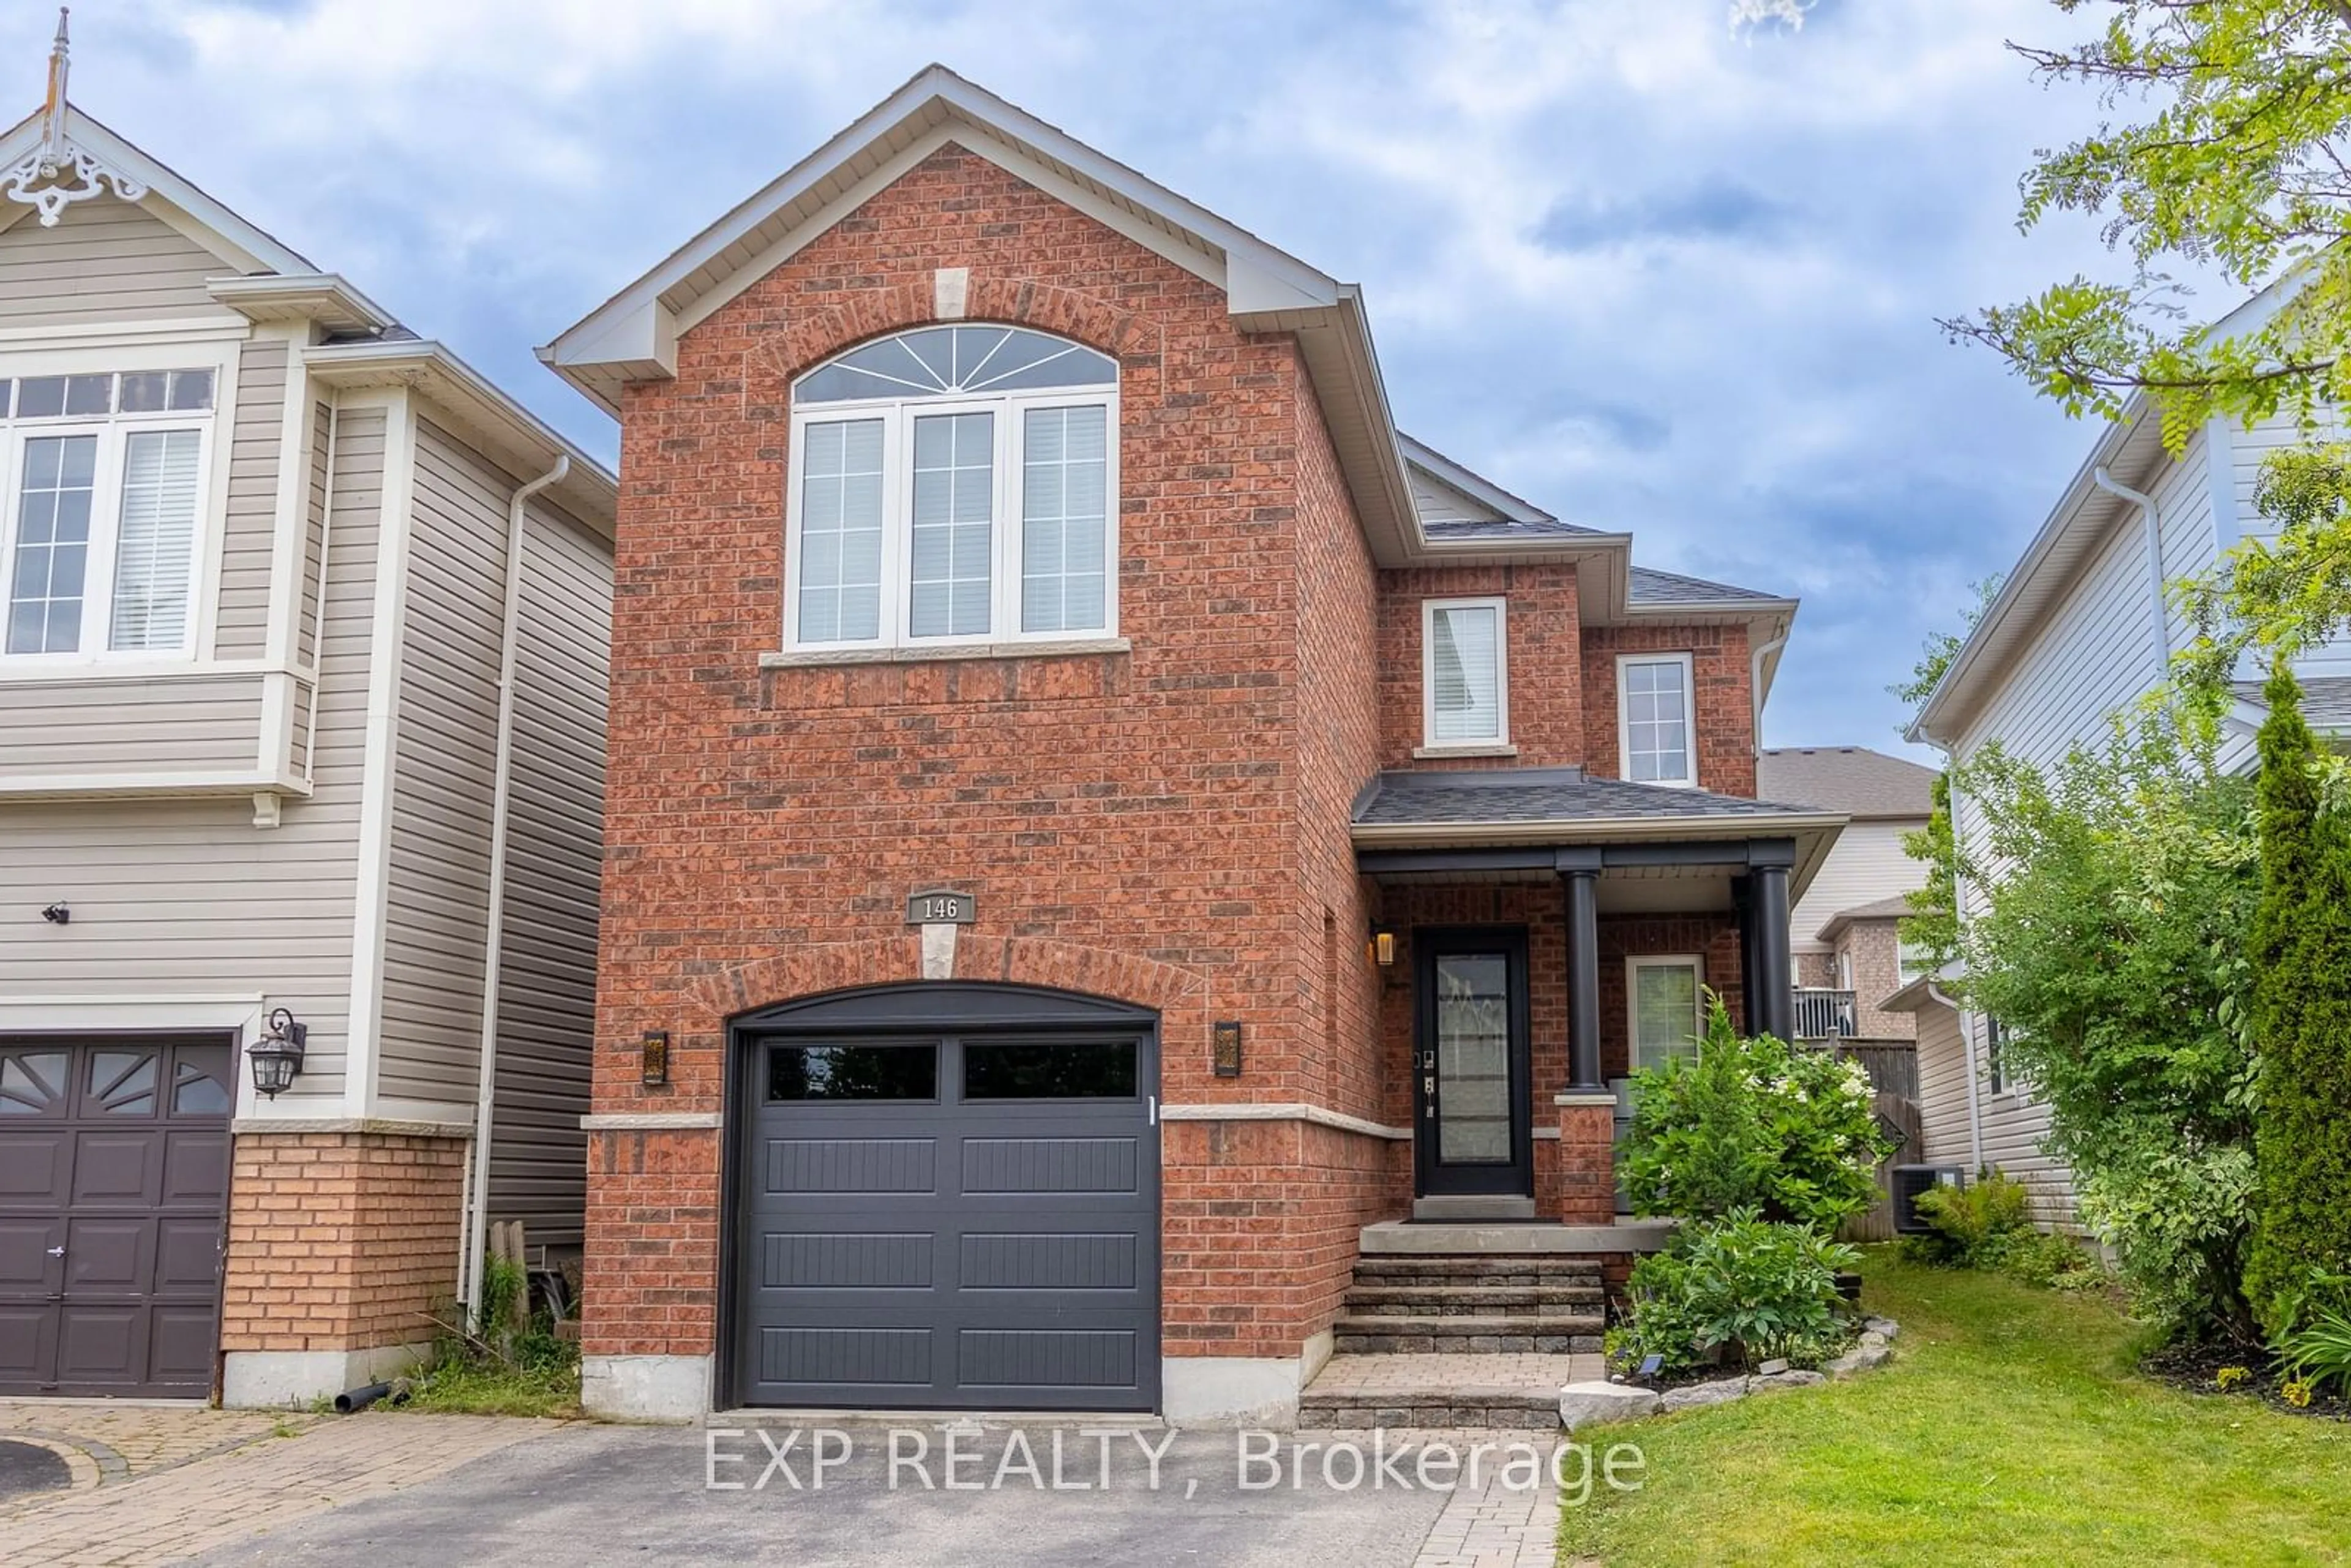 Home with brick exterior material for 146 Bannister St, Clarington Ontario L1C 5L9